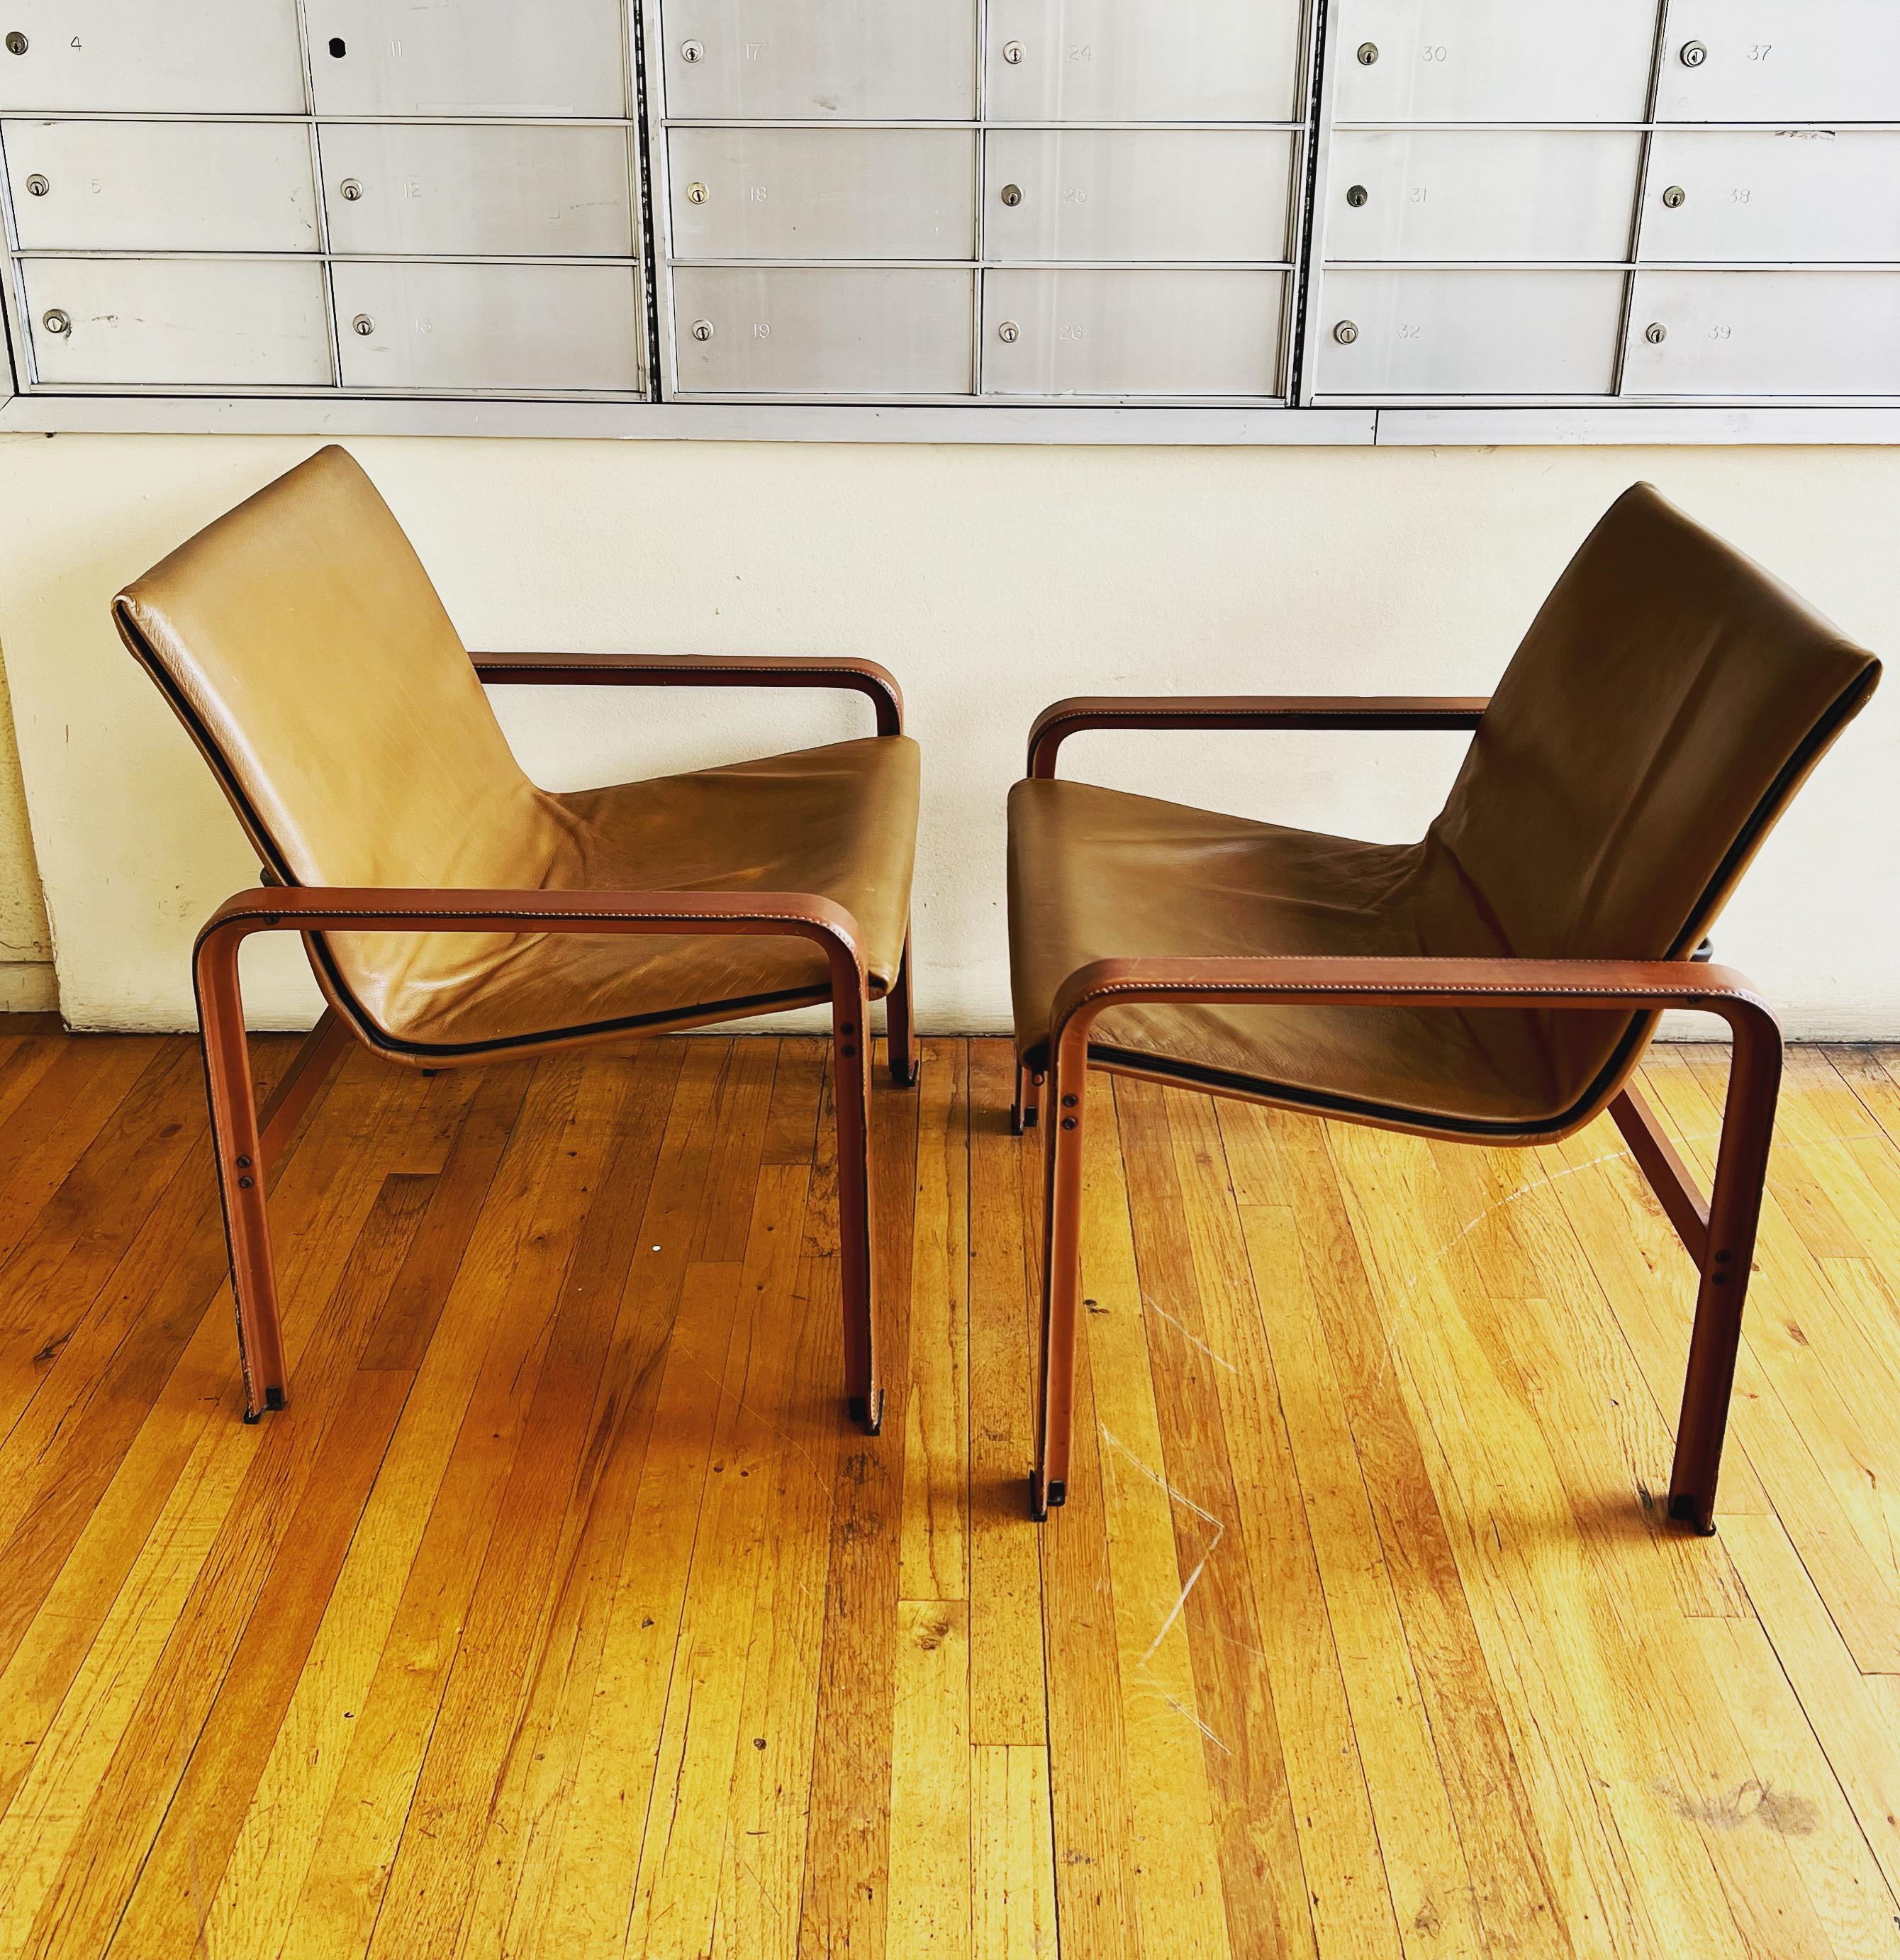 Pair of lounge chairs in patinated leather. Designed and made by Matteo Grassi in Italy in the 1980s. Great original condition.